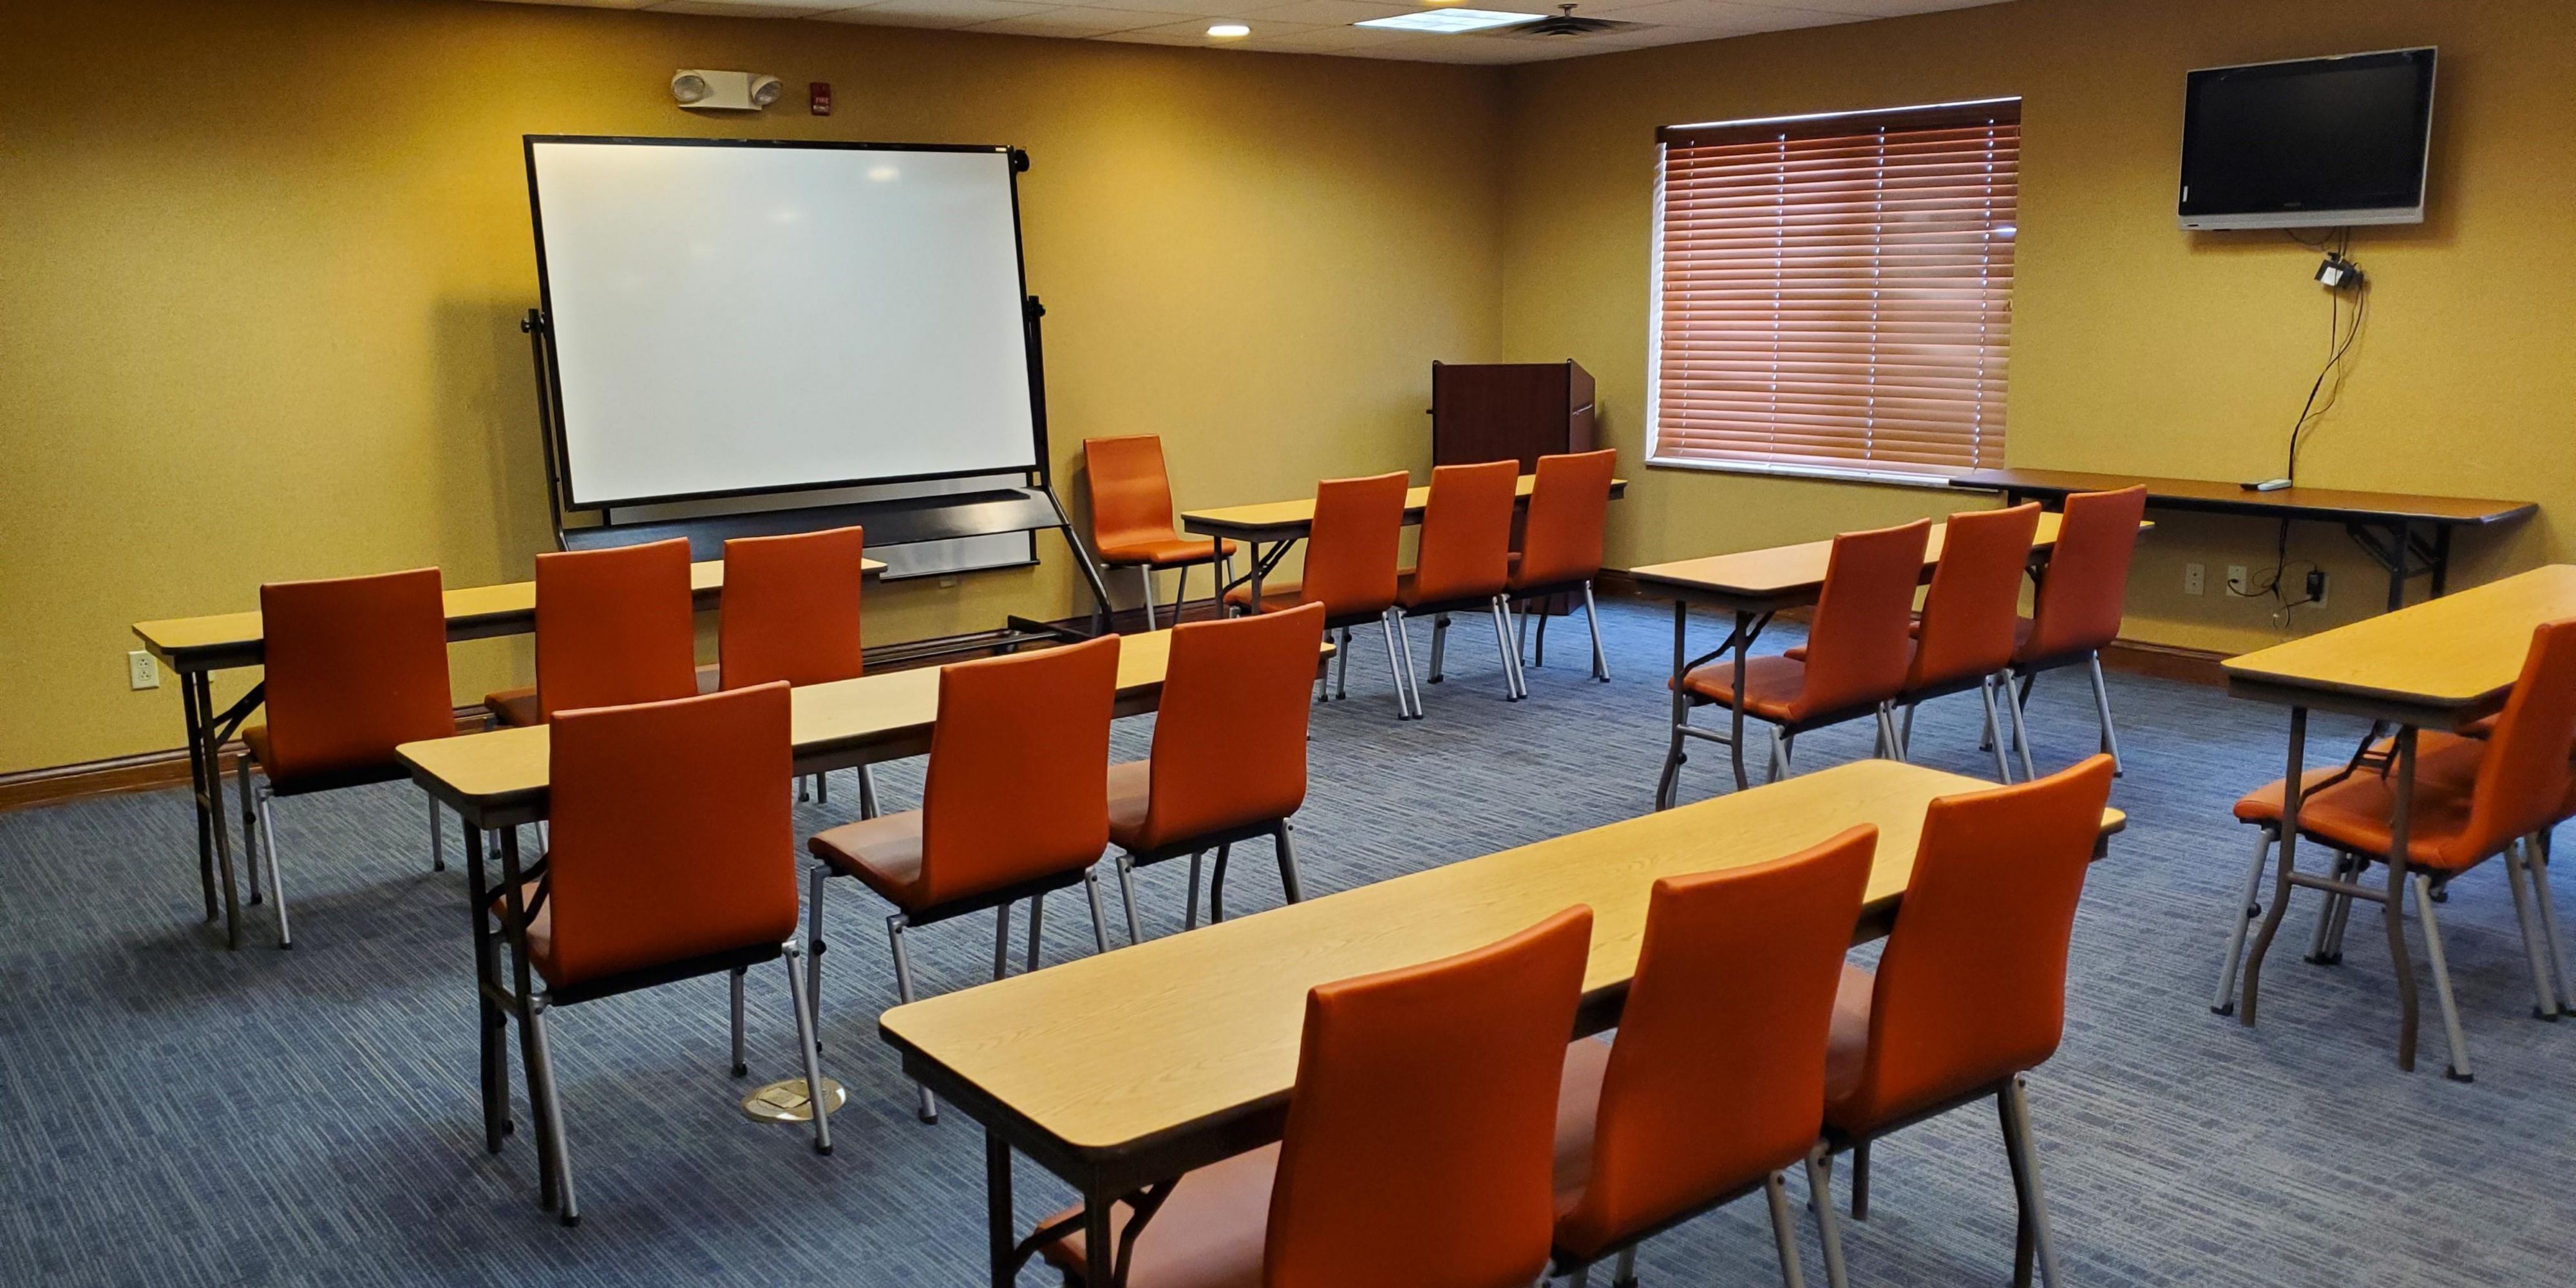 Host a formal business meeting or a unique special occasion in our versatile meeting space. Our hotel offers 625 sq. ft. of space, catering options, and event planning experts. Contact our Sales Office for your next event.